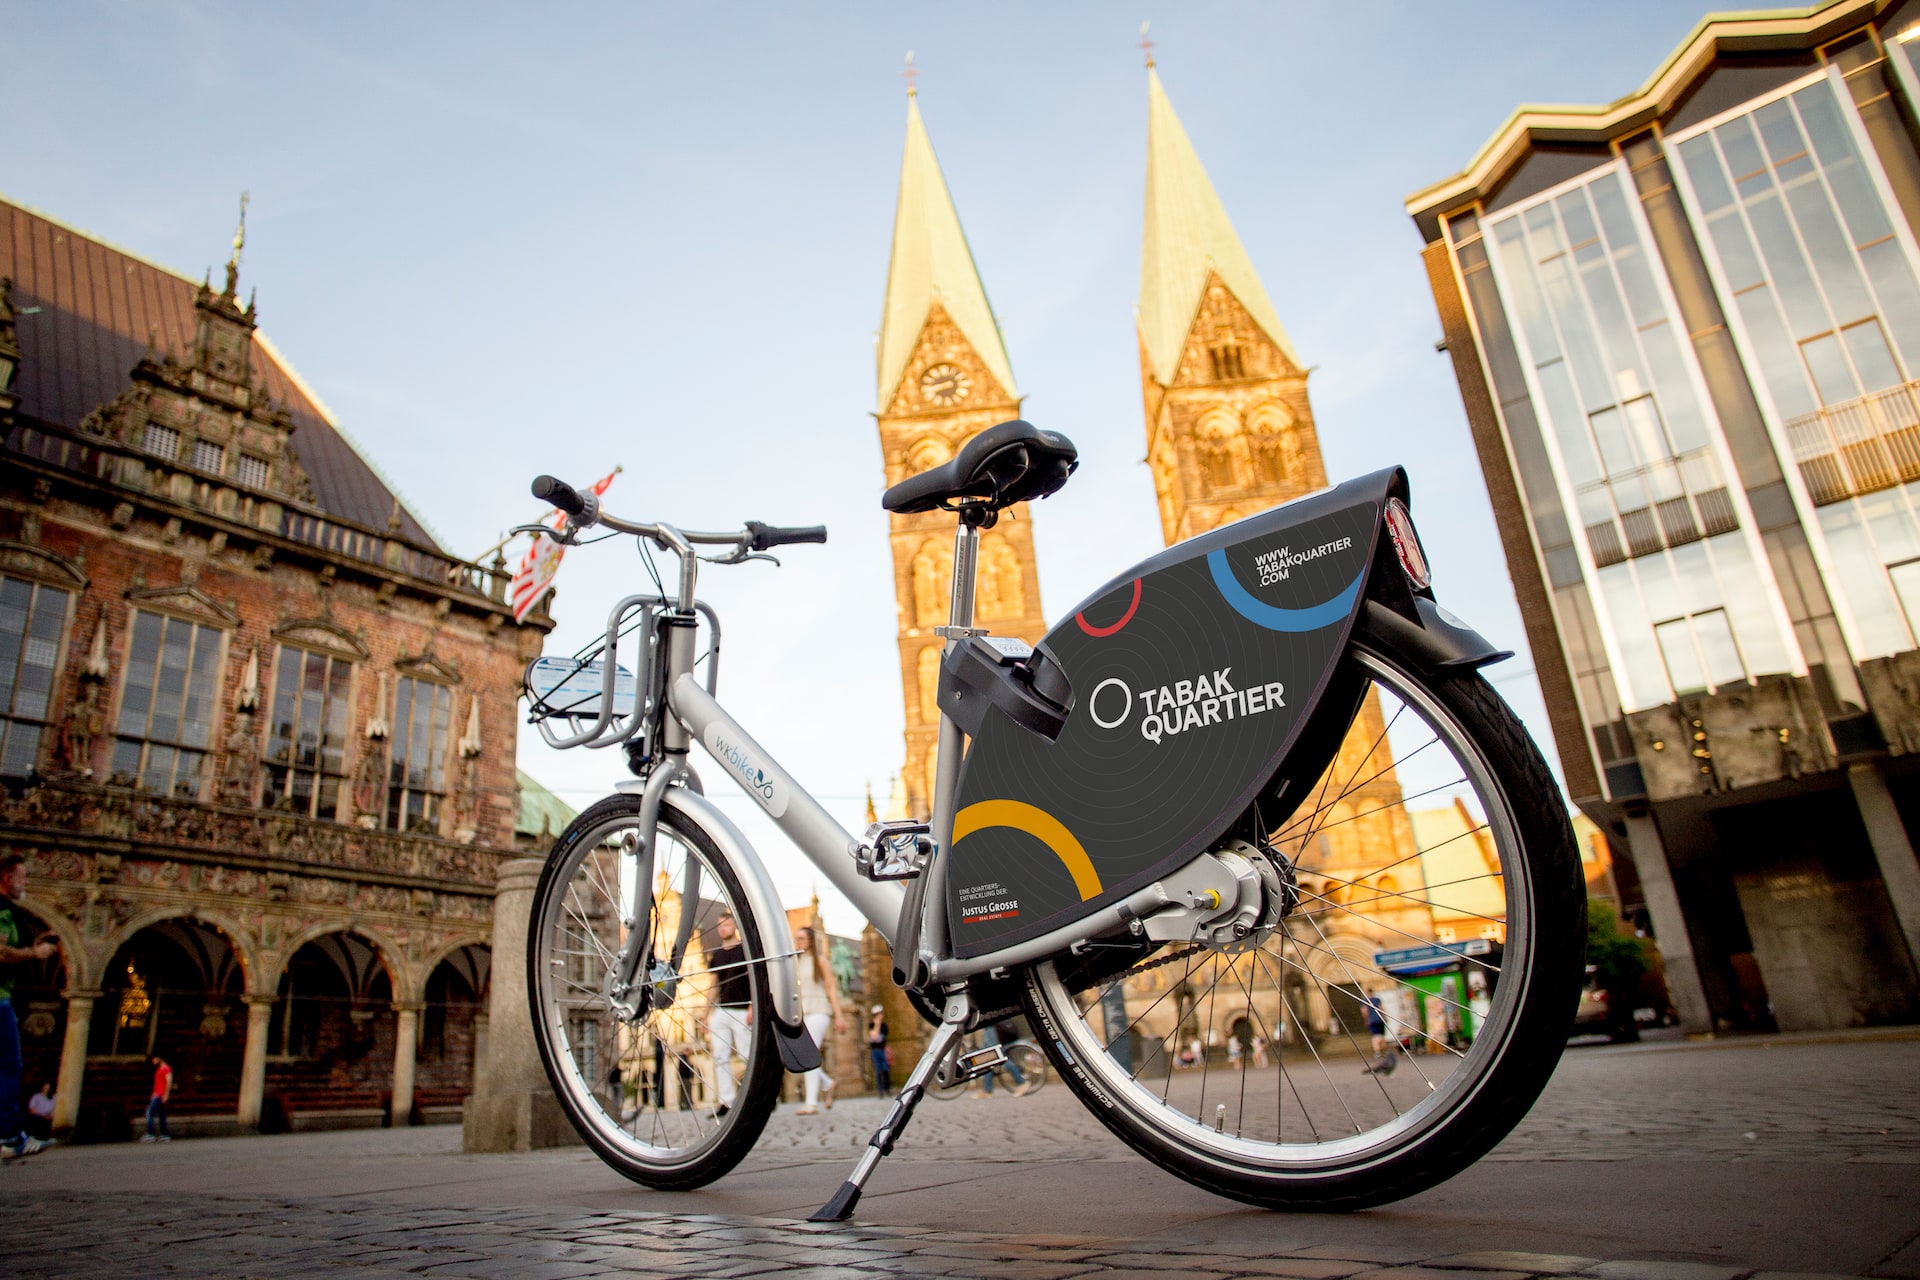 Nextbike from the Tobacco Quarter | unique by ATLANTIC Hotels Bremen